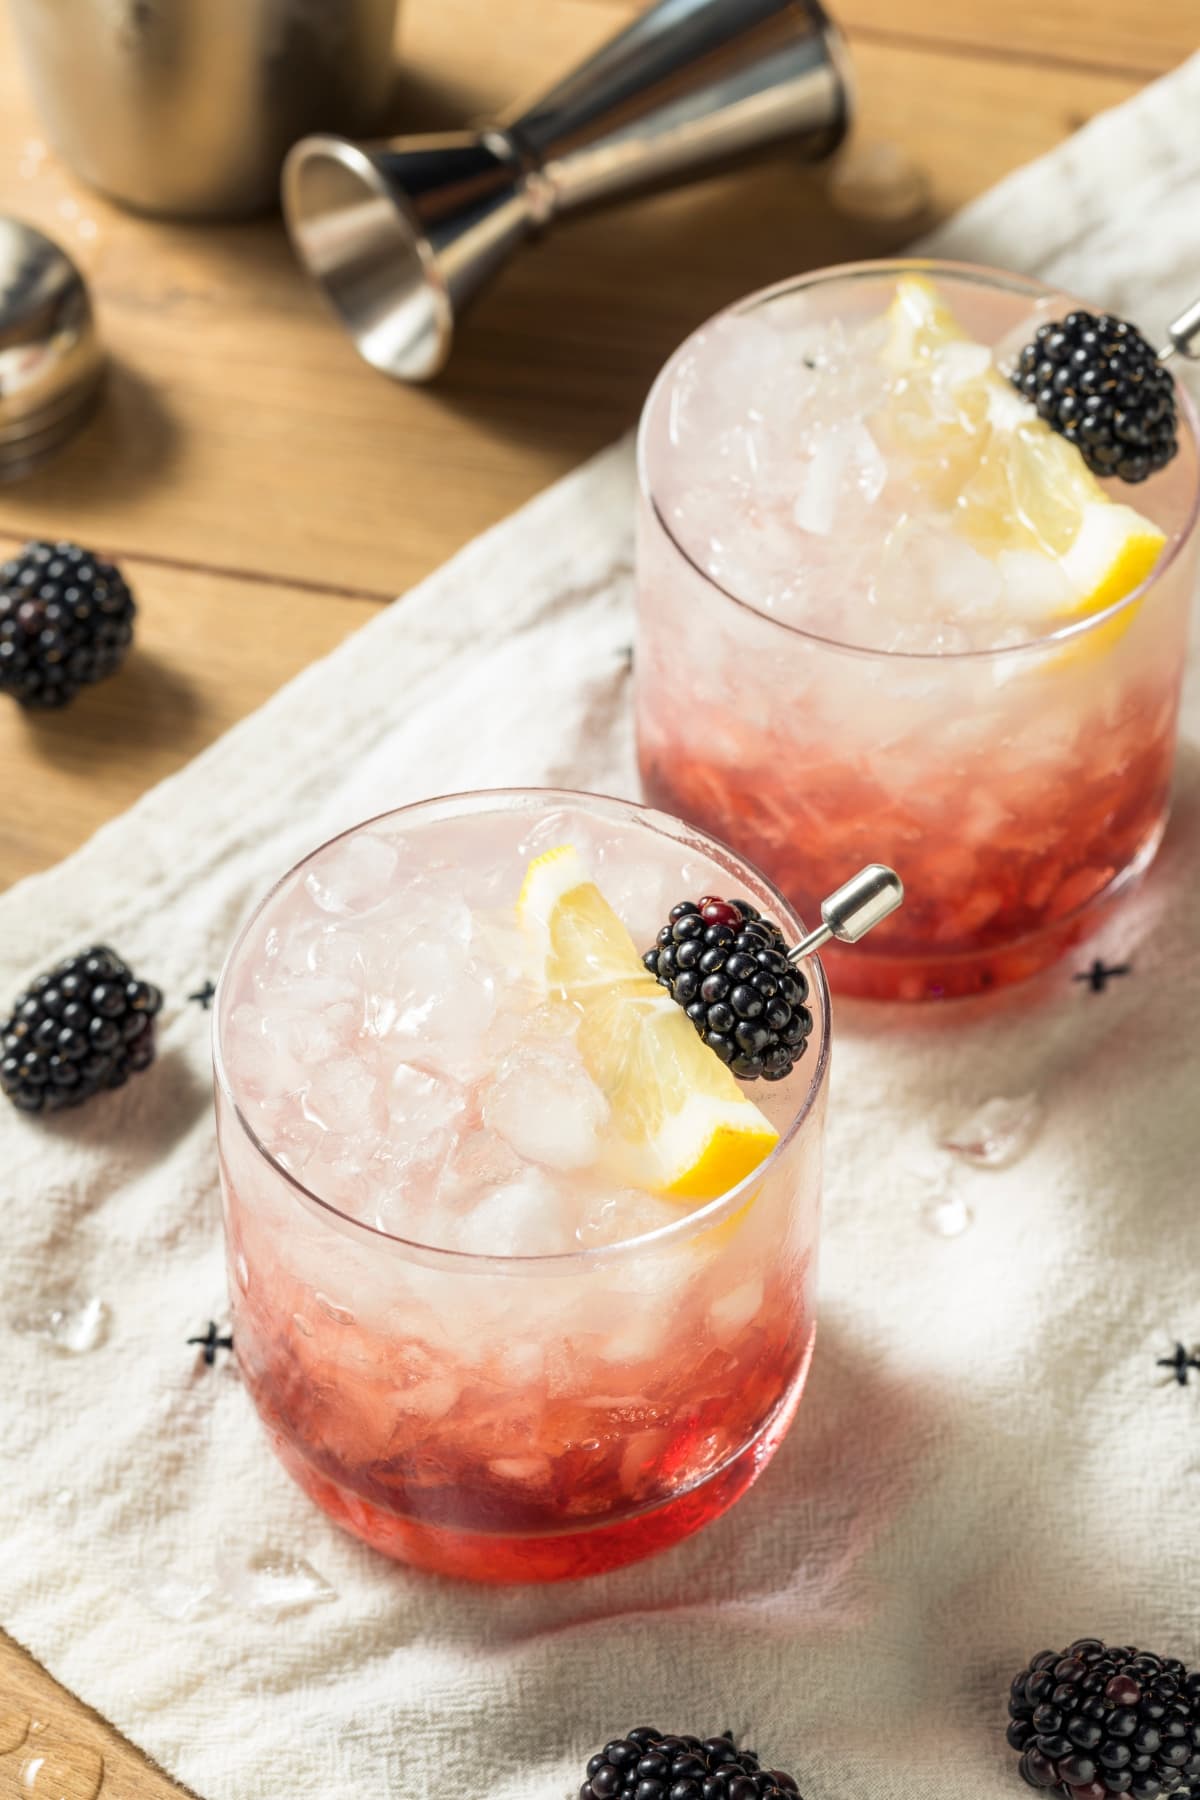 Bramble cocktail served in glasses filled with crushed ice garnished with blackberries on skewers and a slice of lemon. 